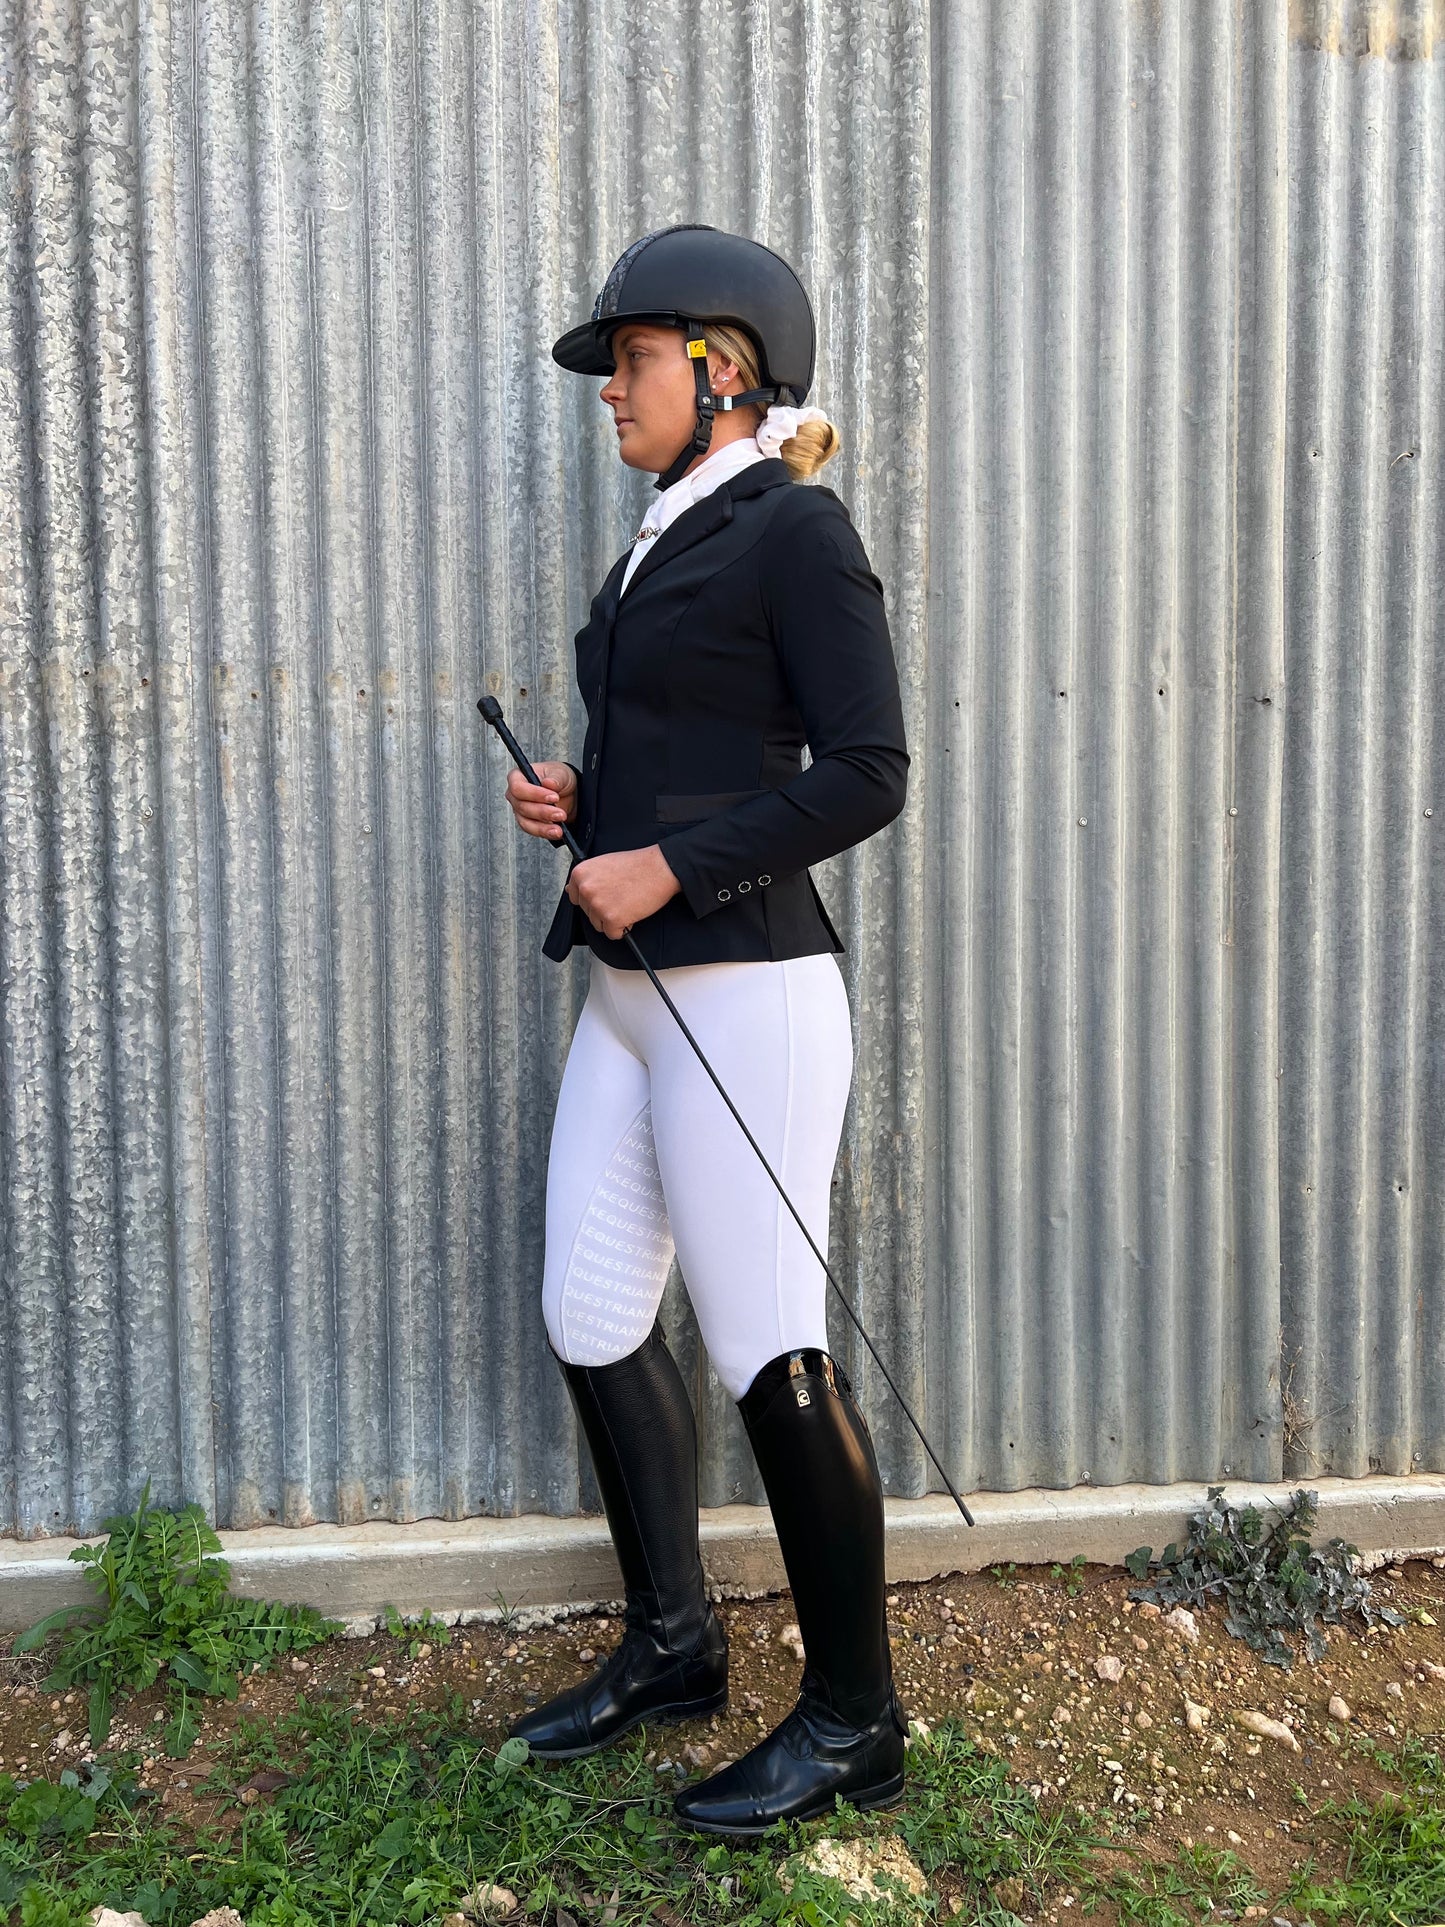 Equestrian in helmet and horse riding tights standing beside metal wall.